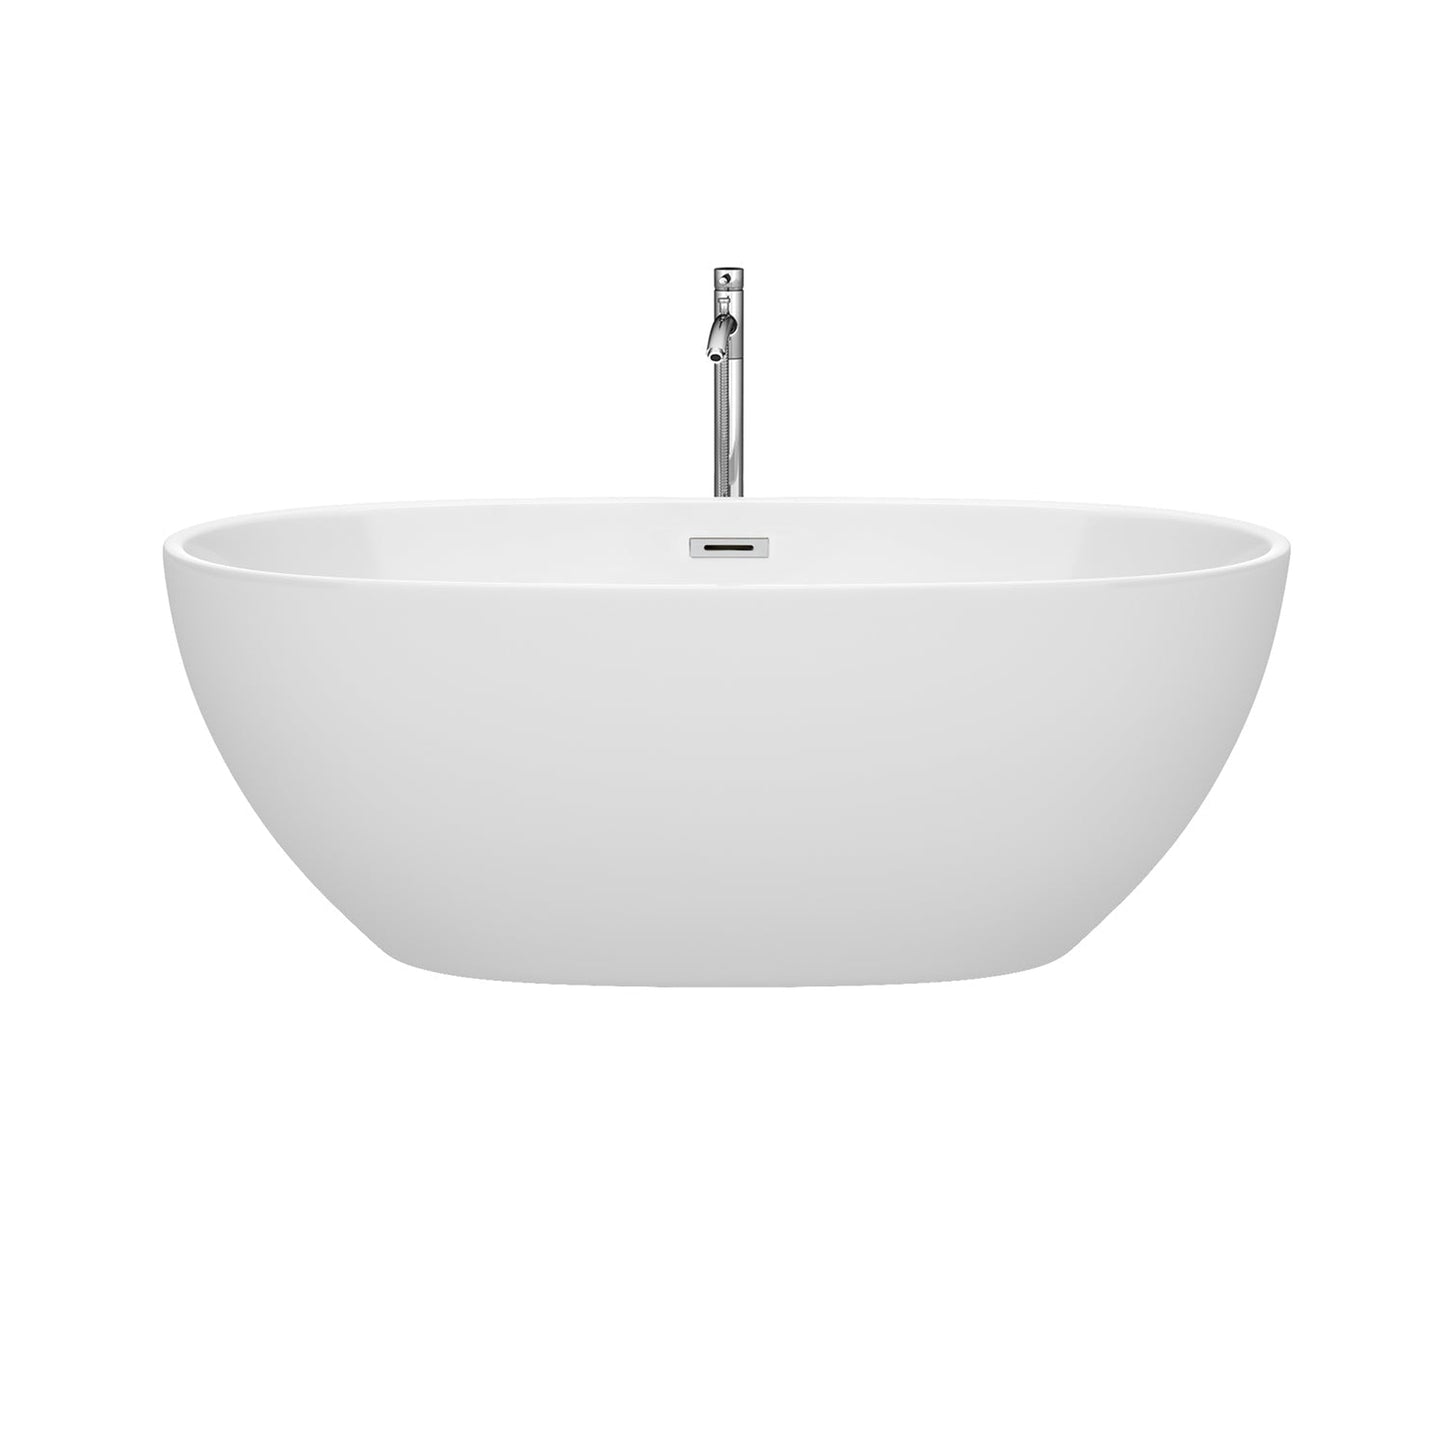 Wyndham Collection Juno 63" Freestanding Bathtub in White With Floor Mounted Faucet, Drain and Overflow Trim in Polished Chrome